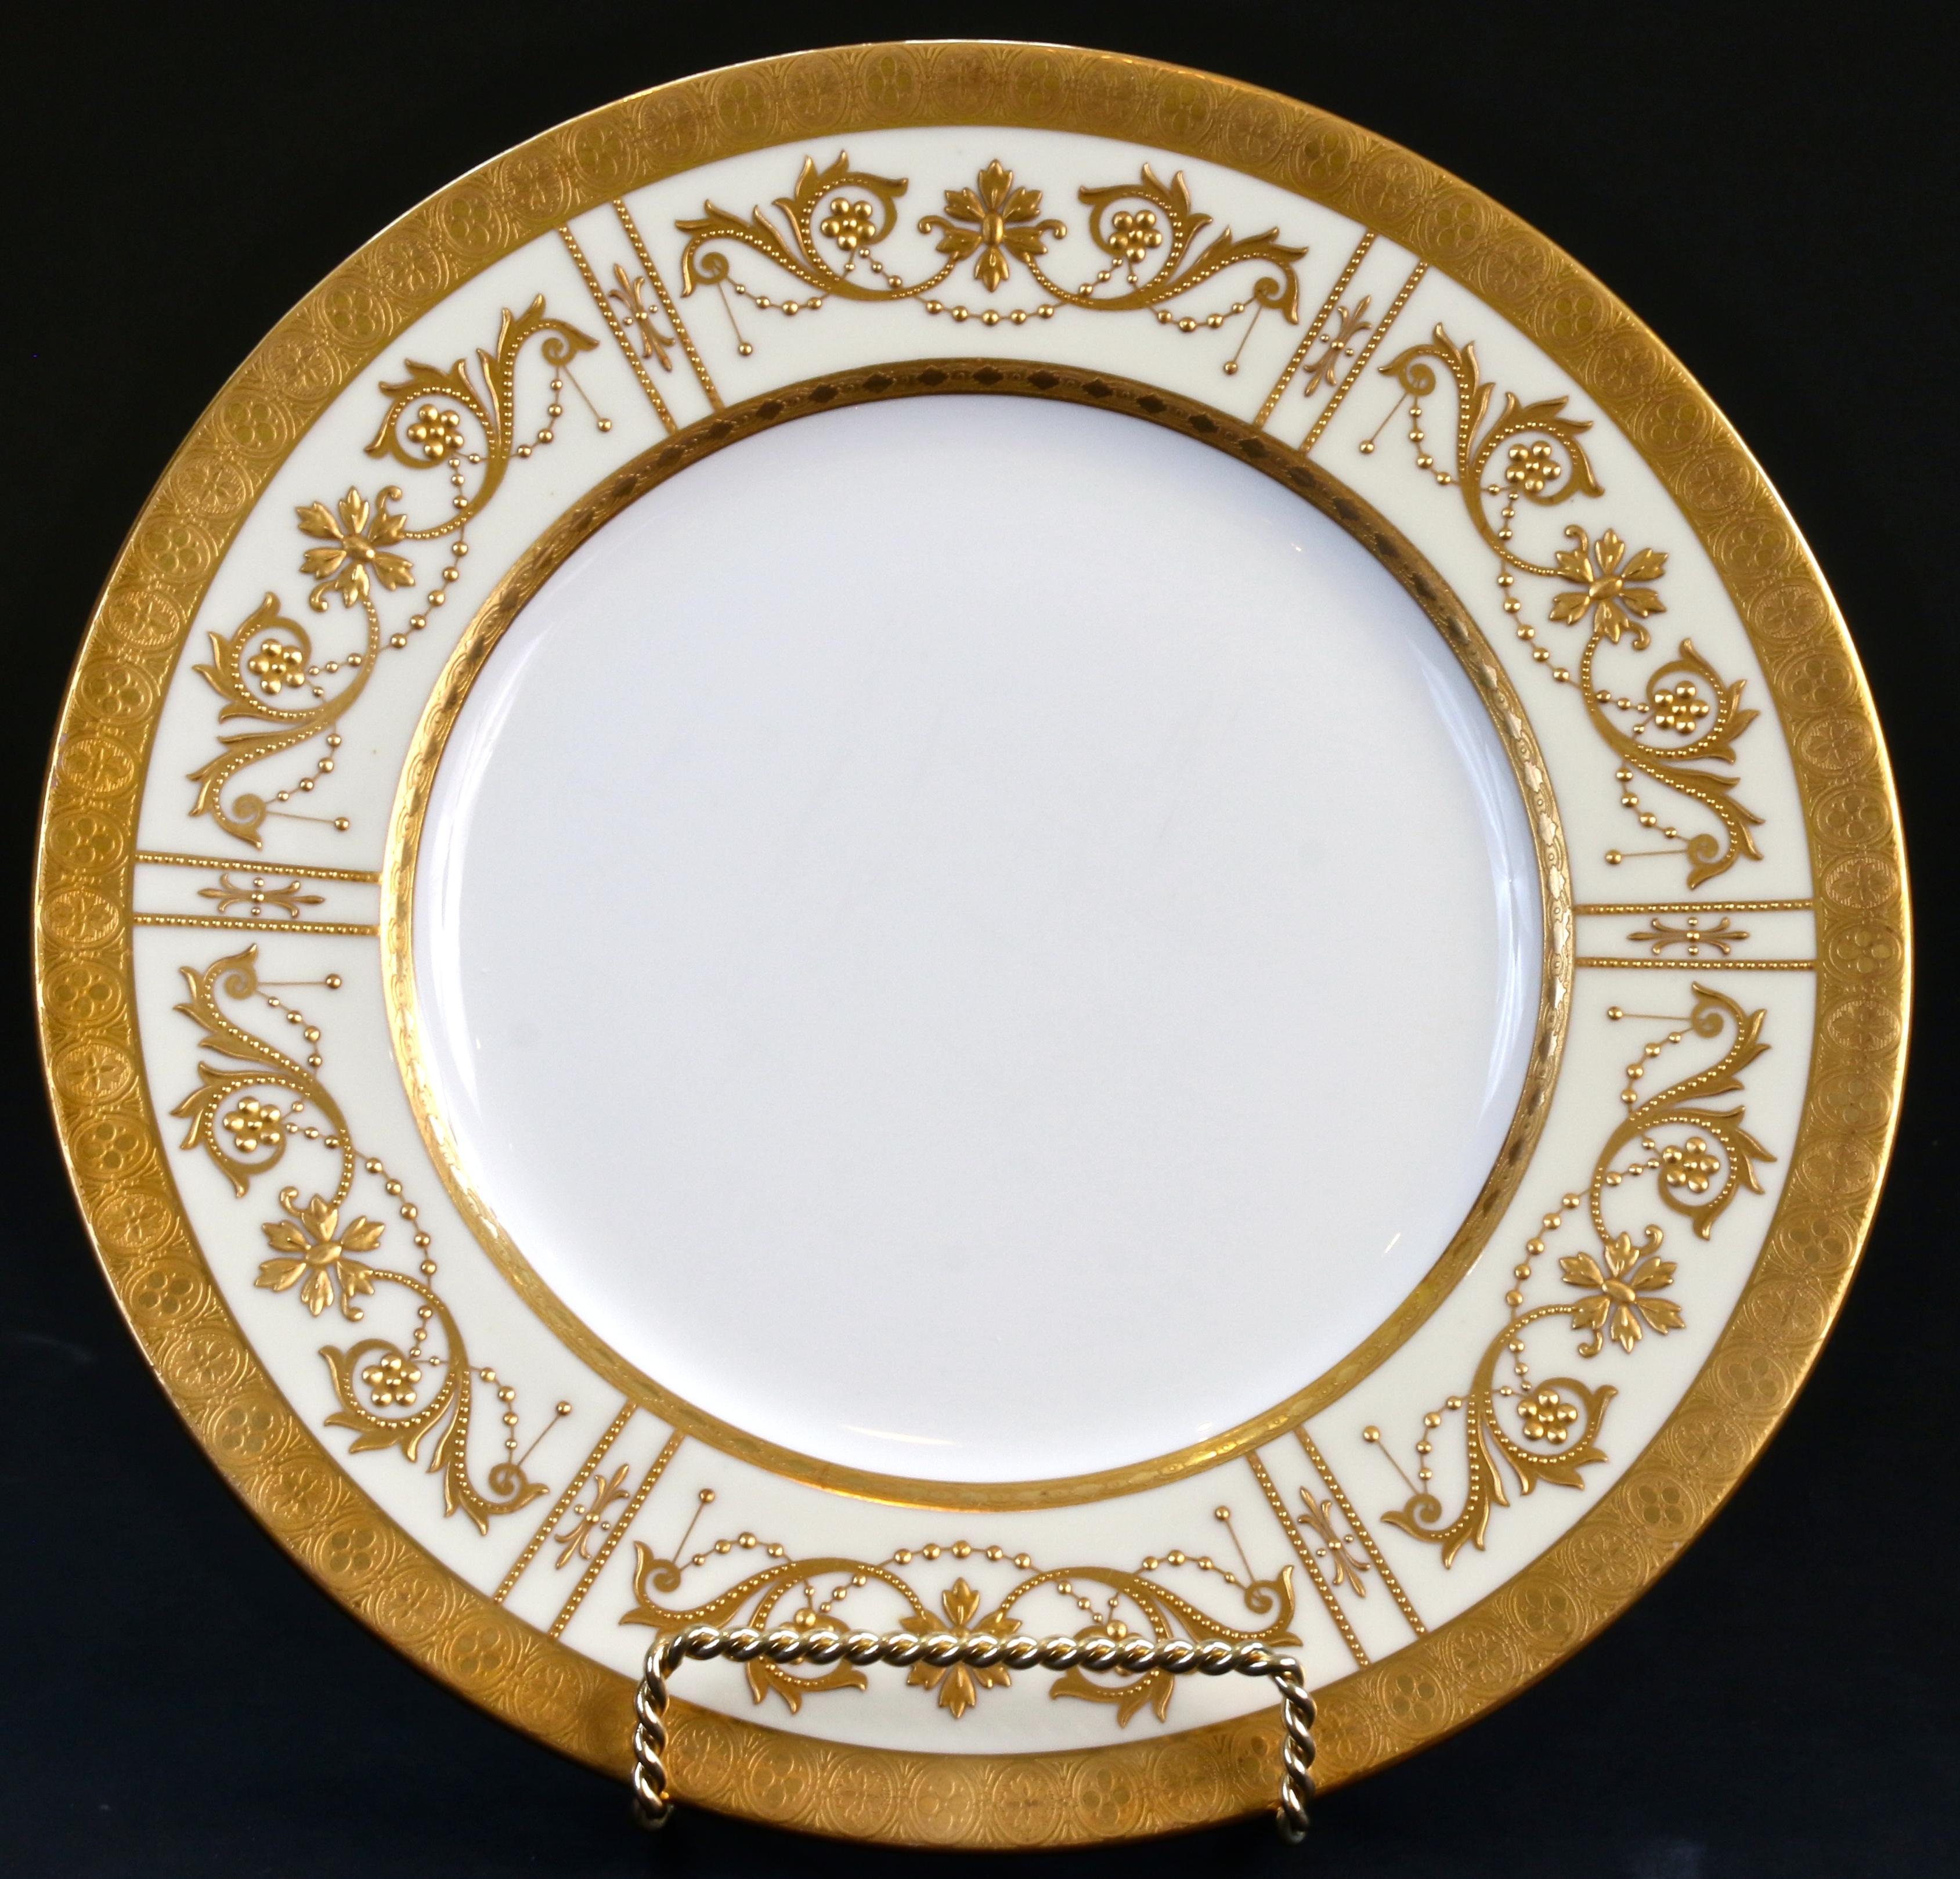 This elegant set of 19th century Minton, Stoke-on-Trent, England heavy raised paste 22-karat plates are for presentation or dinner. The plates have a white center with an ivory rim that is decorated with Adam-style beaded swags and scrolling